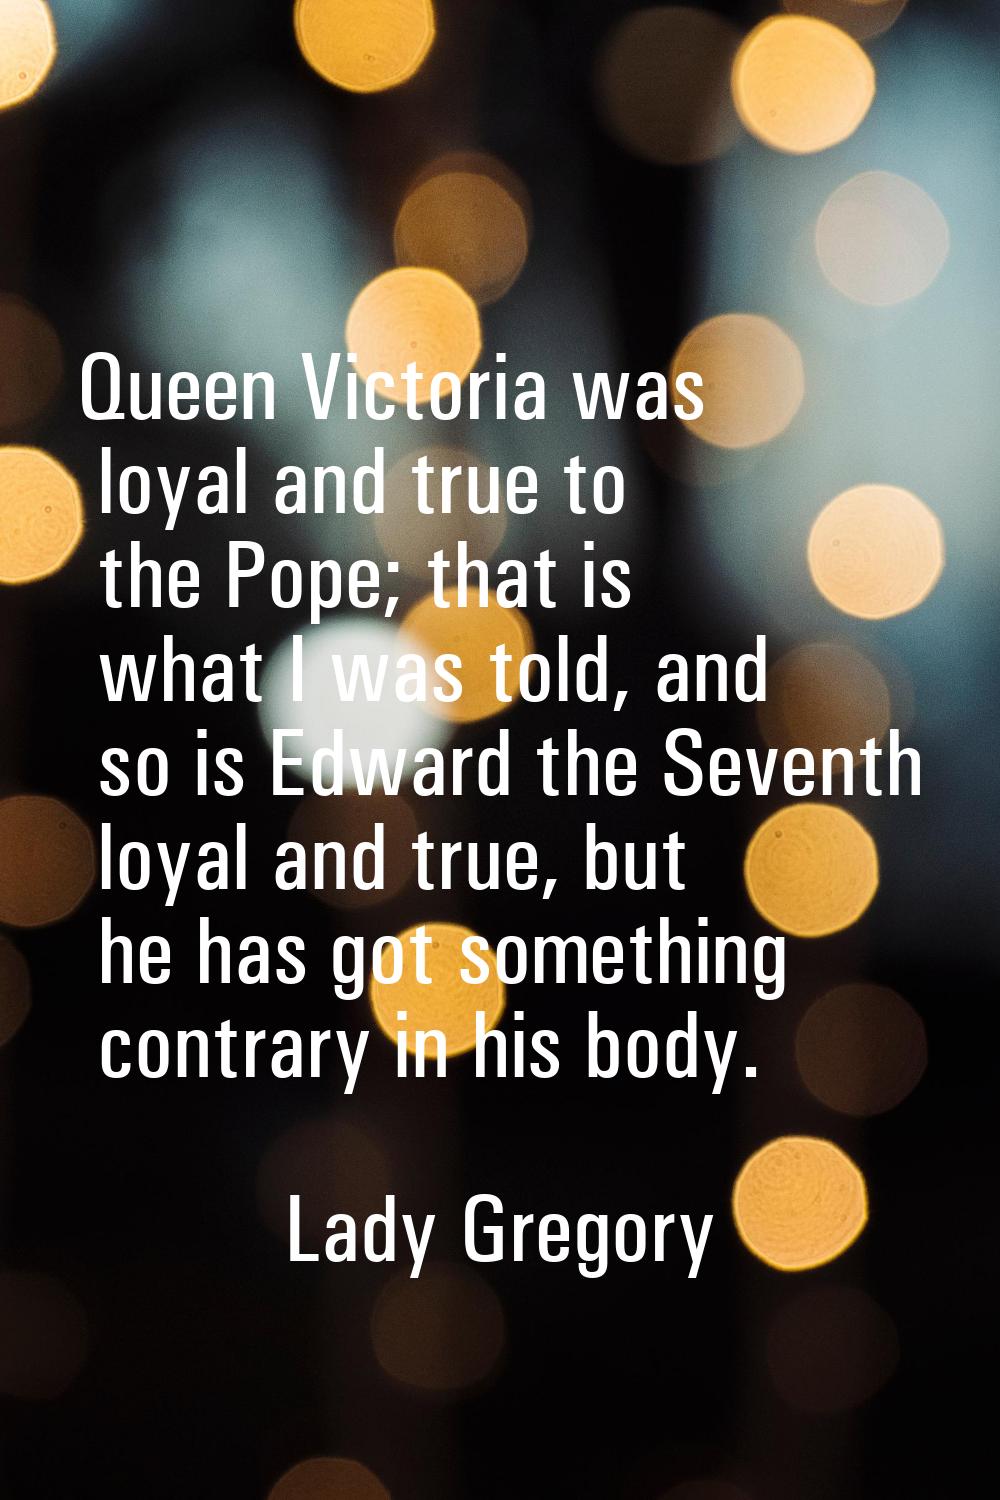 Queen Victoria was loyal and true to the Pope; that is what I was told, and so is Edward the Sevent